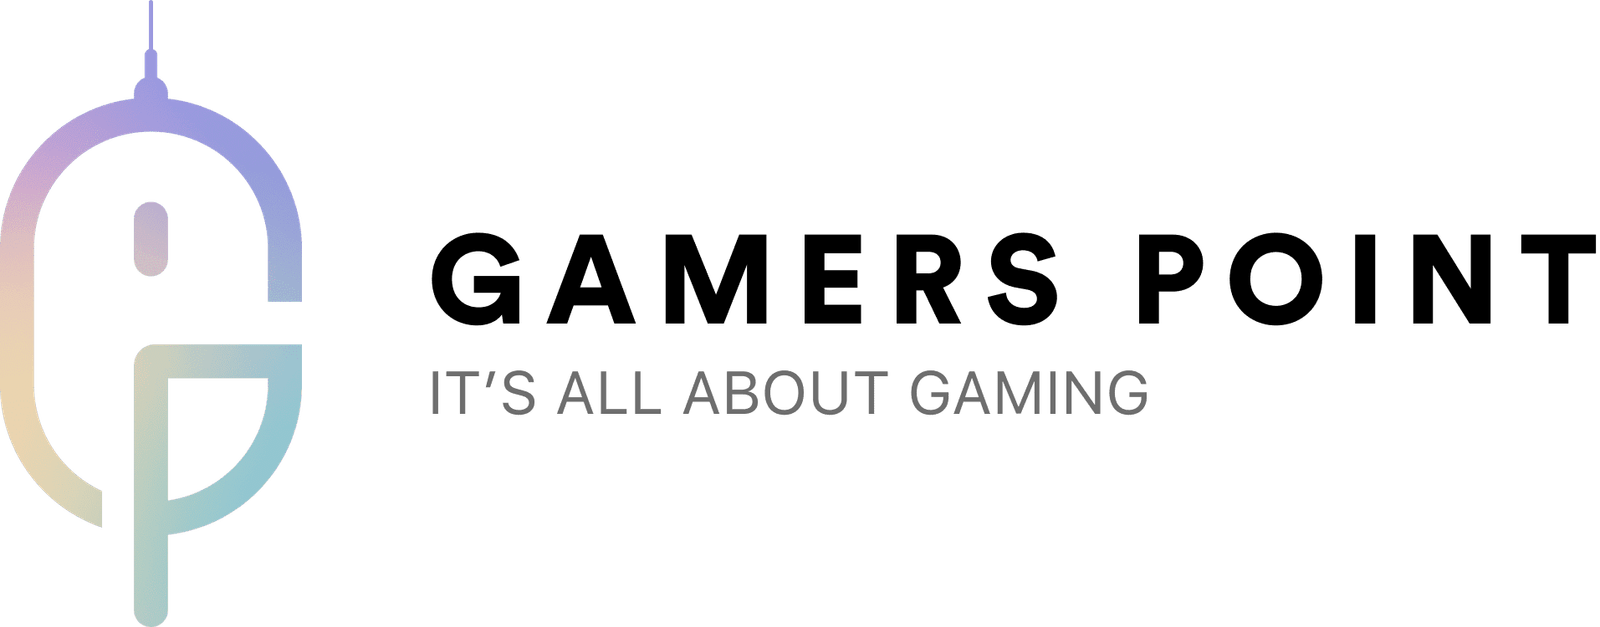 Gamers Point Computers Bahrain